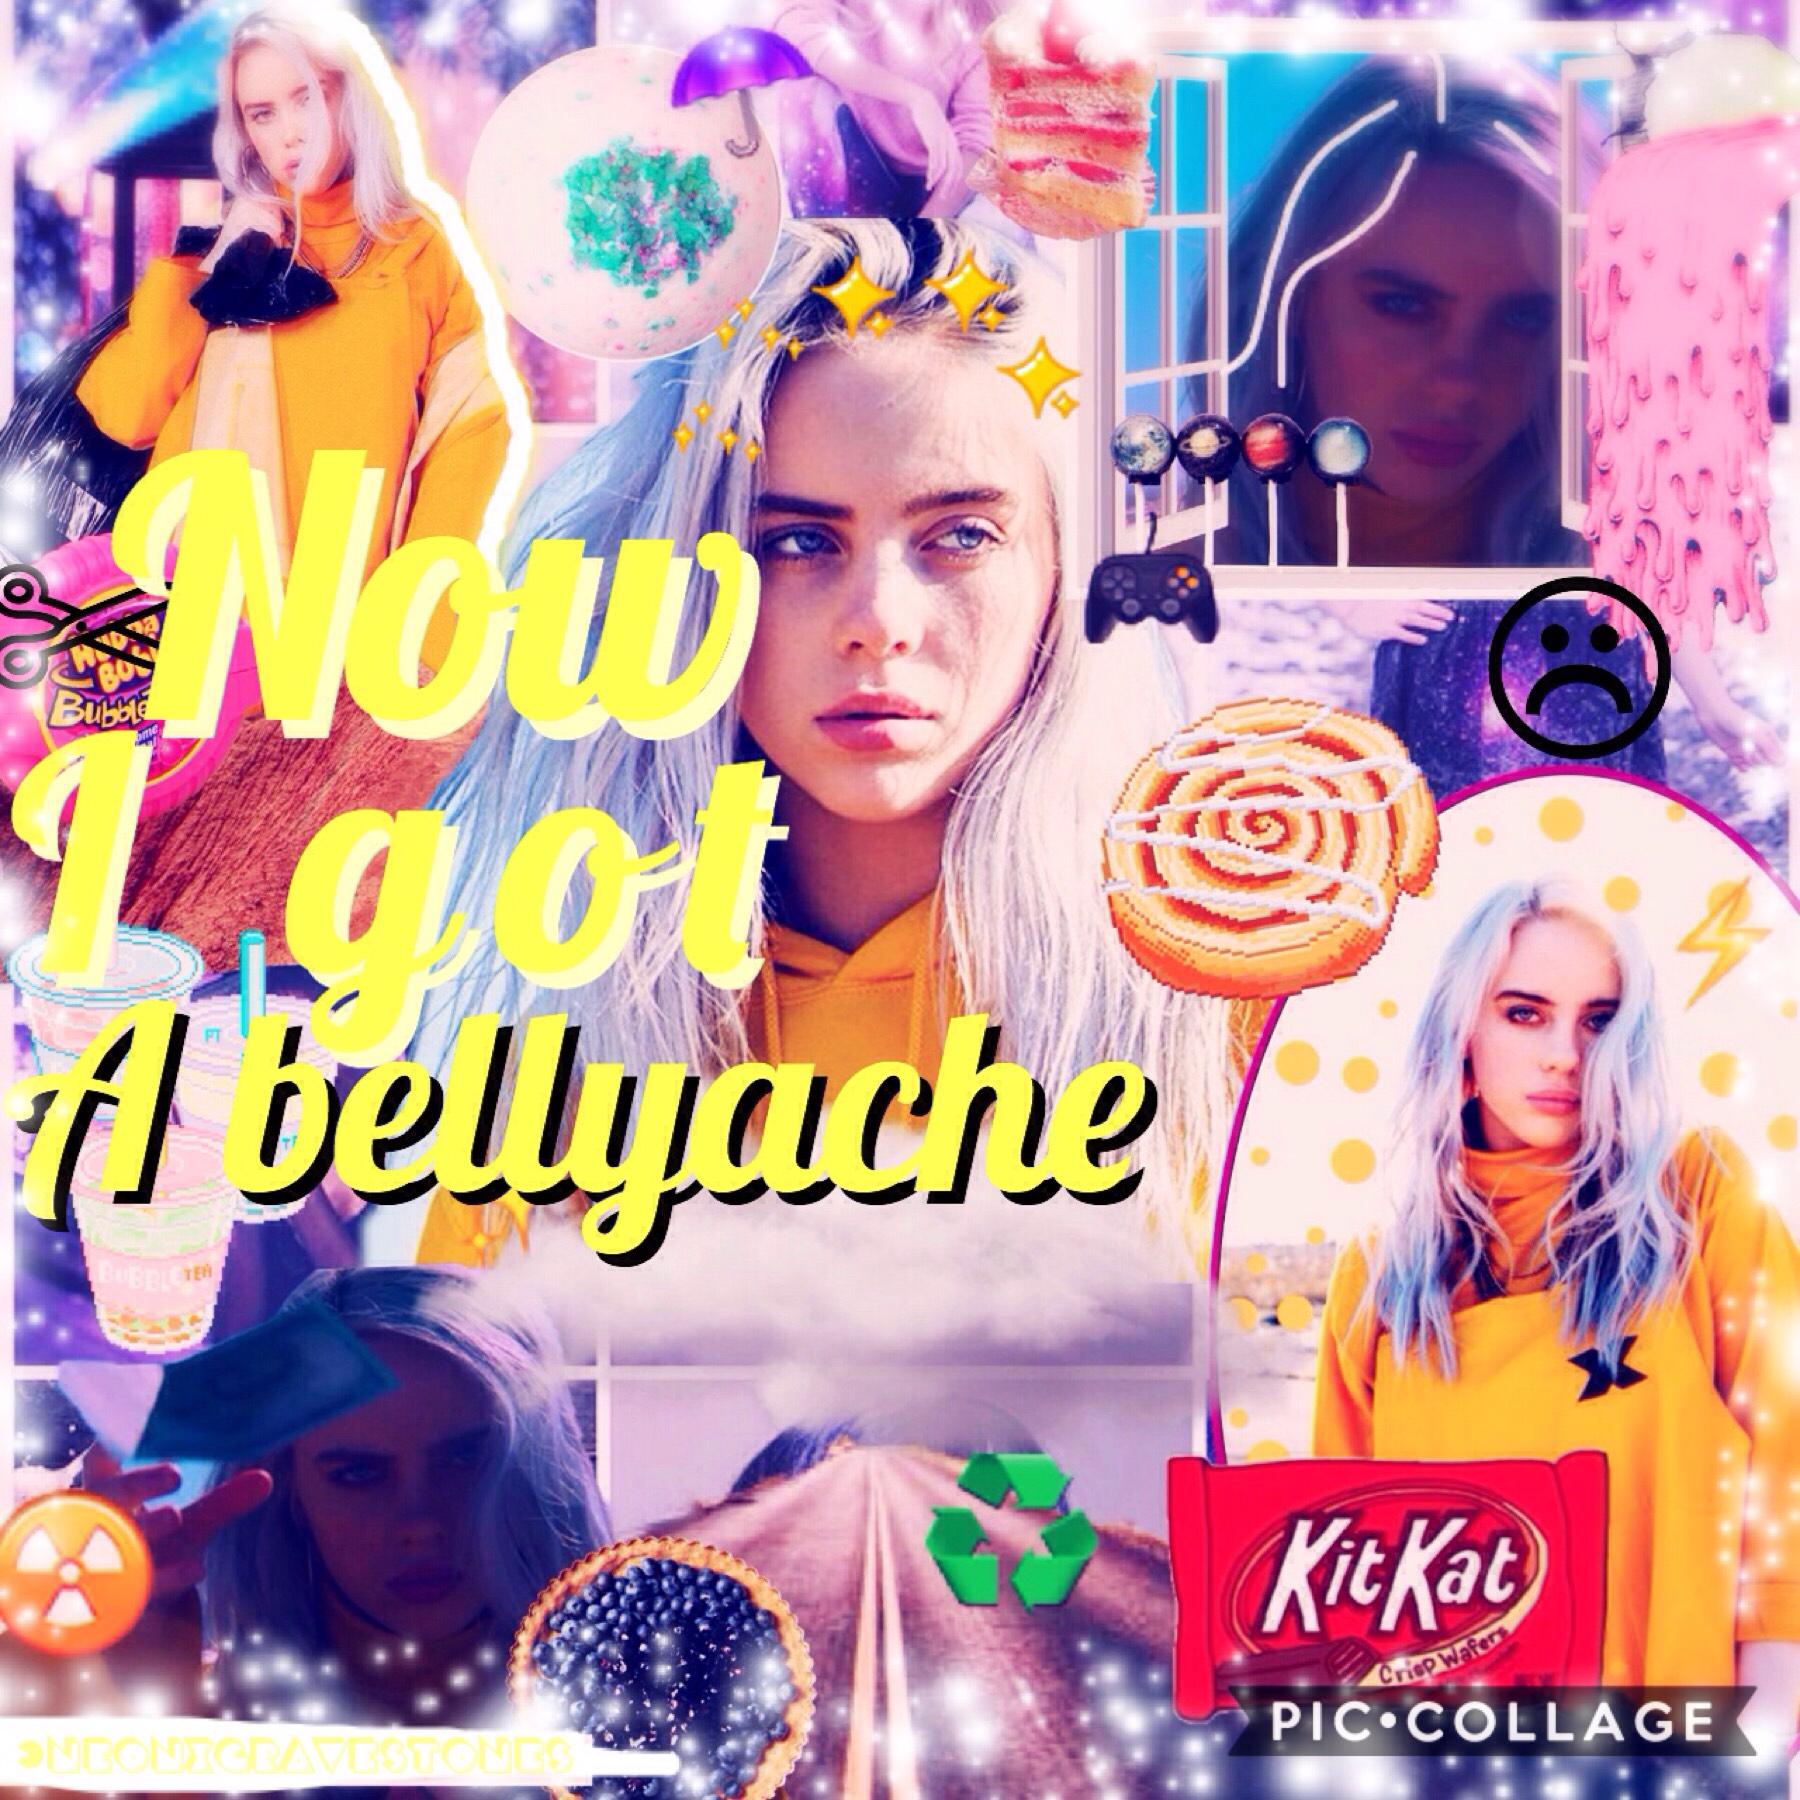 🖖🏼bellyache: Billie Eilish🖖🏼 I AM NOT DEAD (yet) lol. I've just been so busy with school. Please rate this ?/10